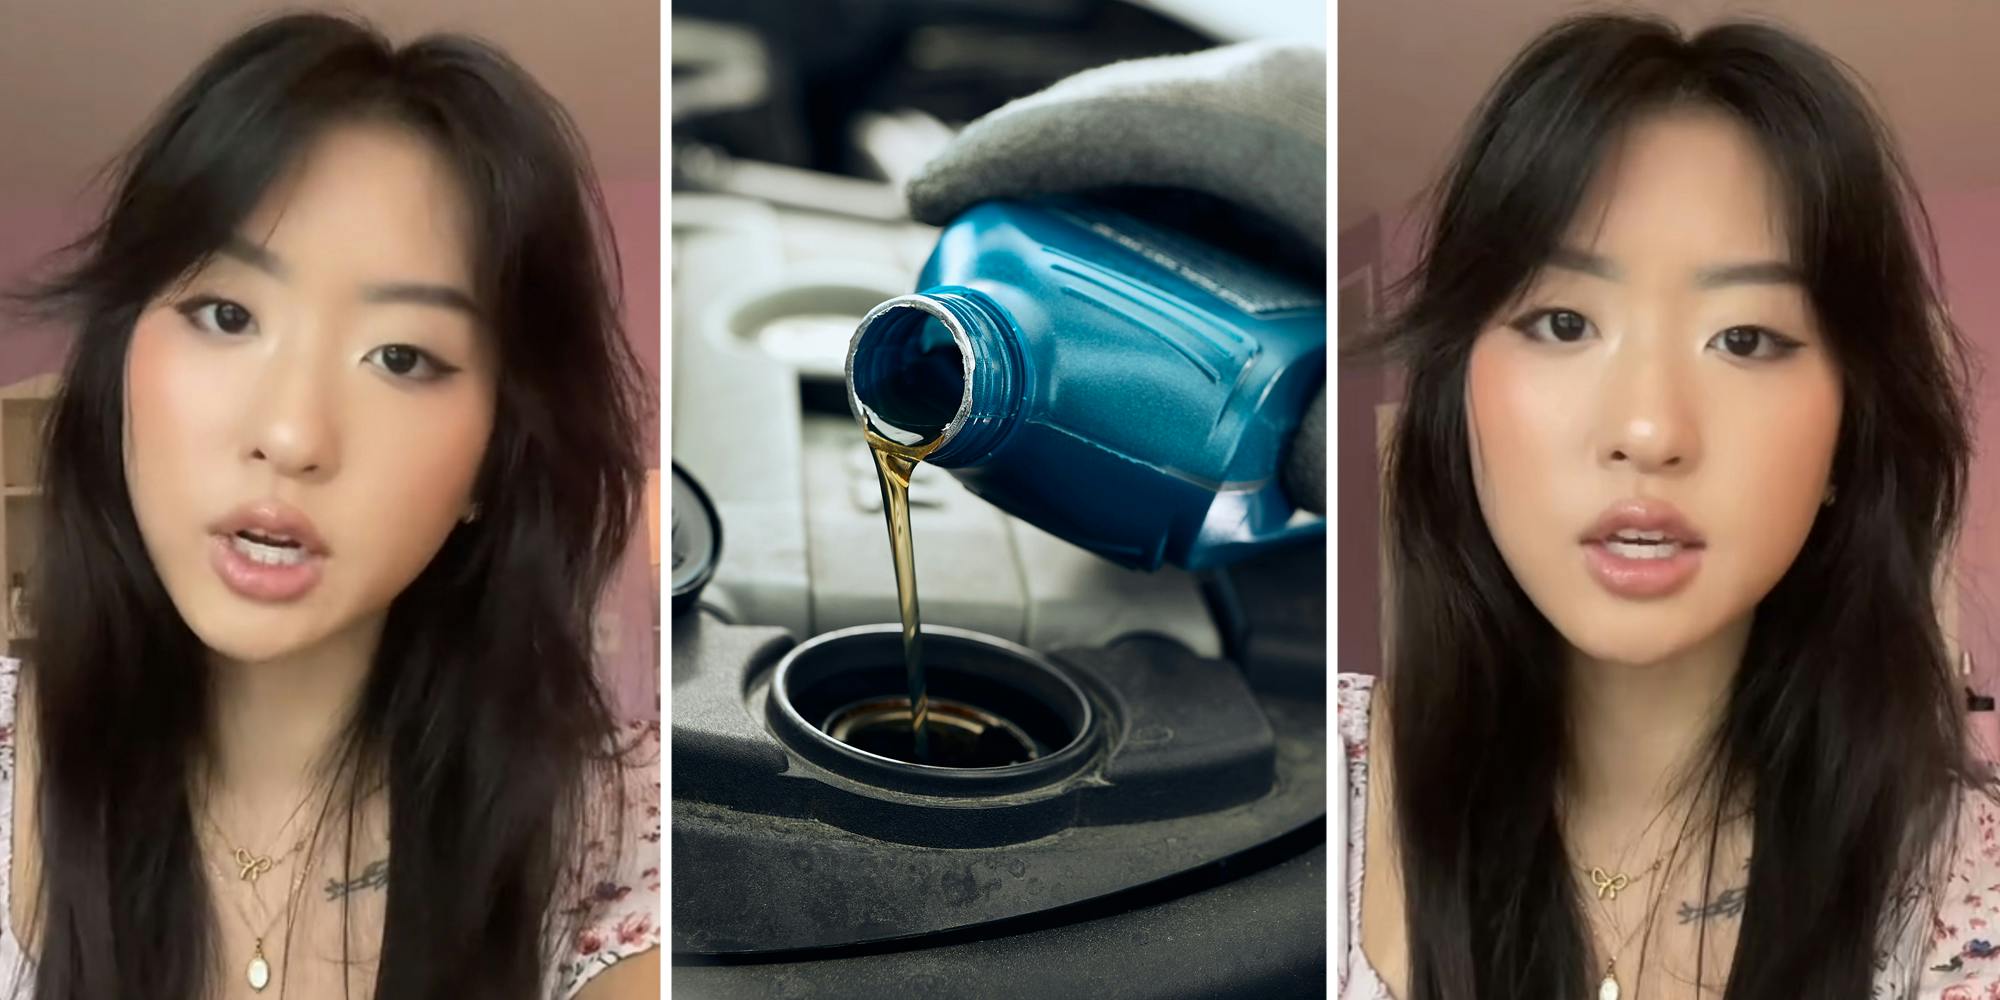 ‘I didn’t want to lose my discount’: Woman issues warning after going to get her oil changed